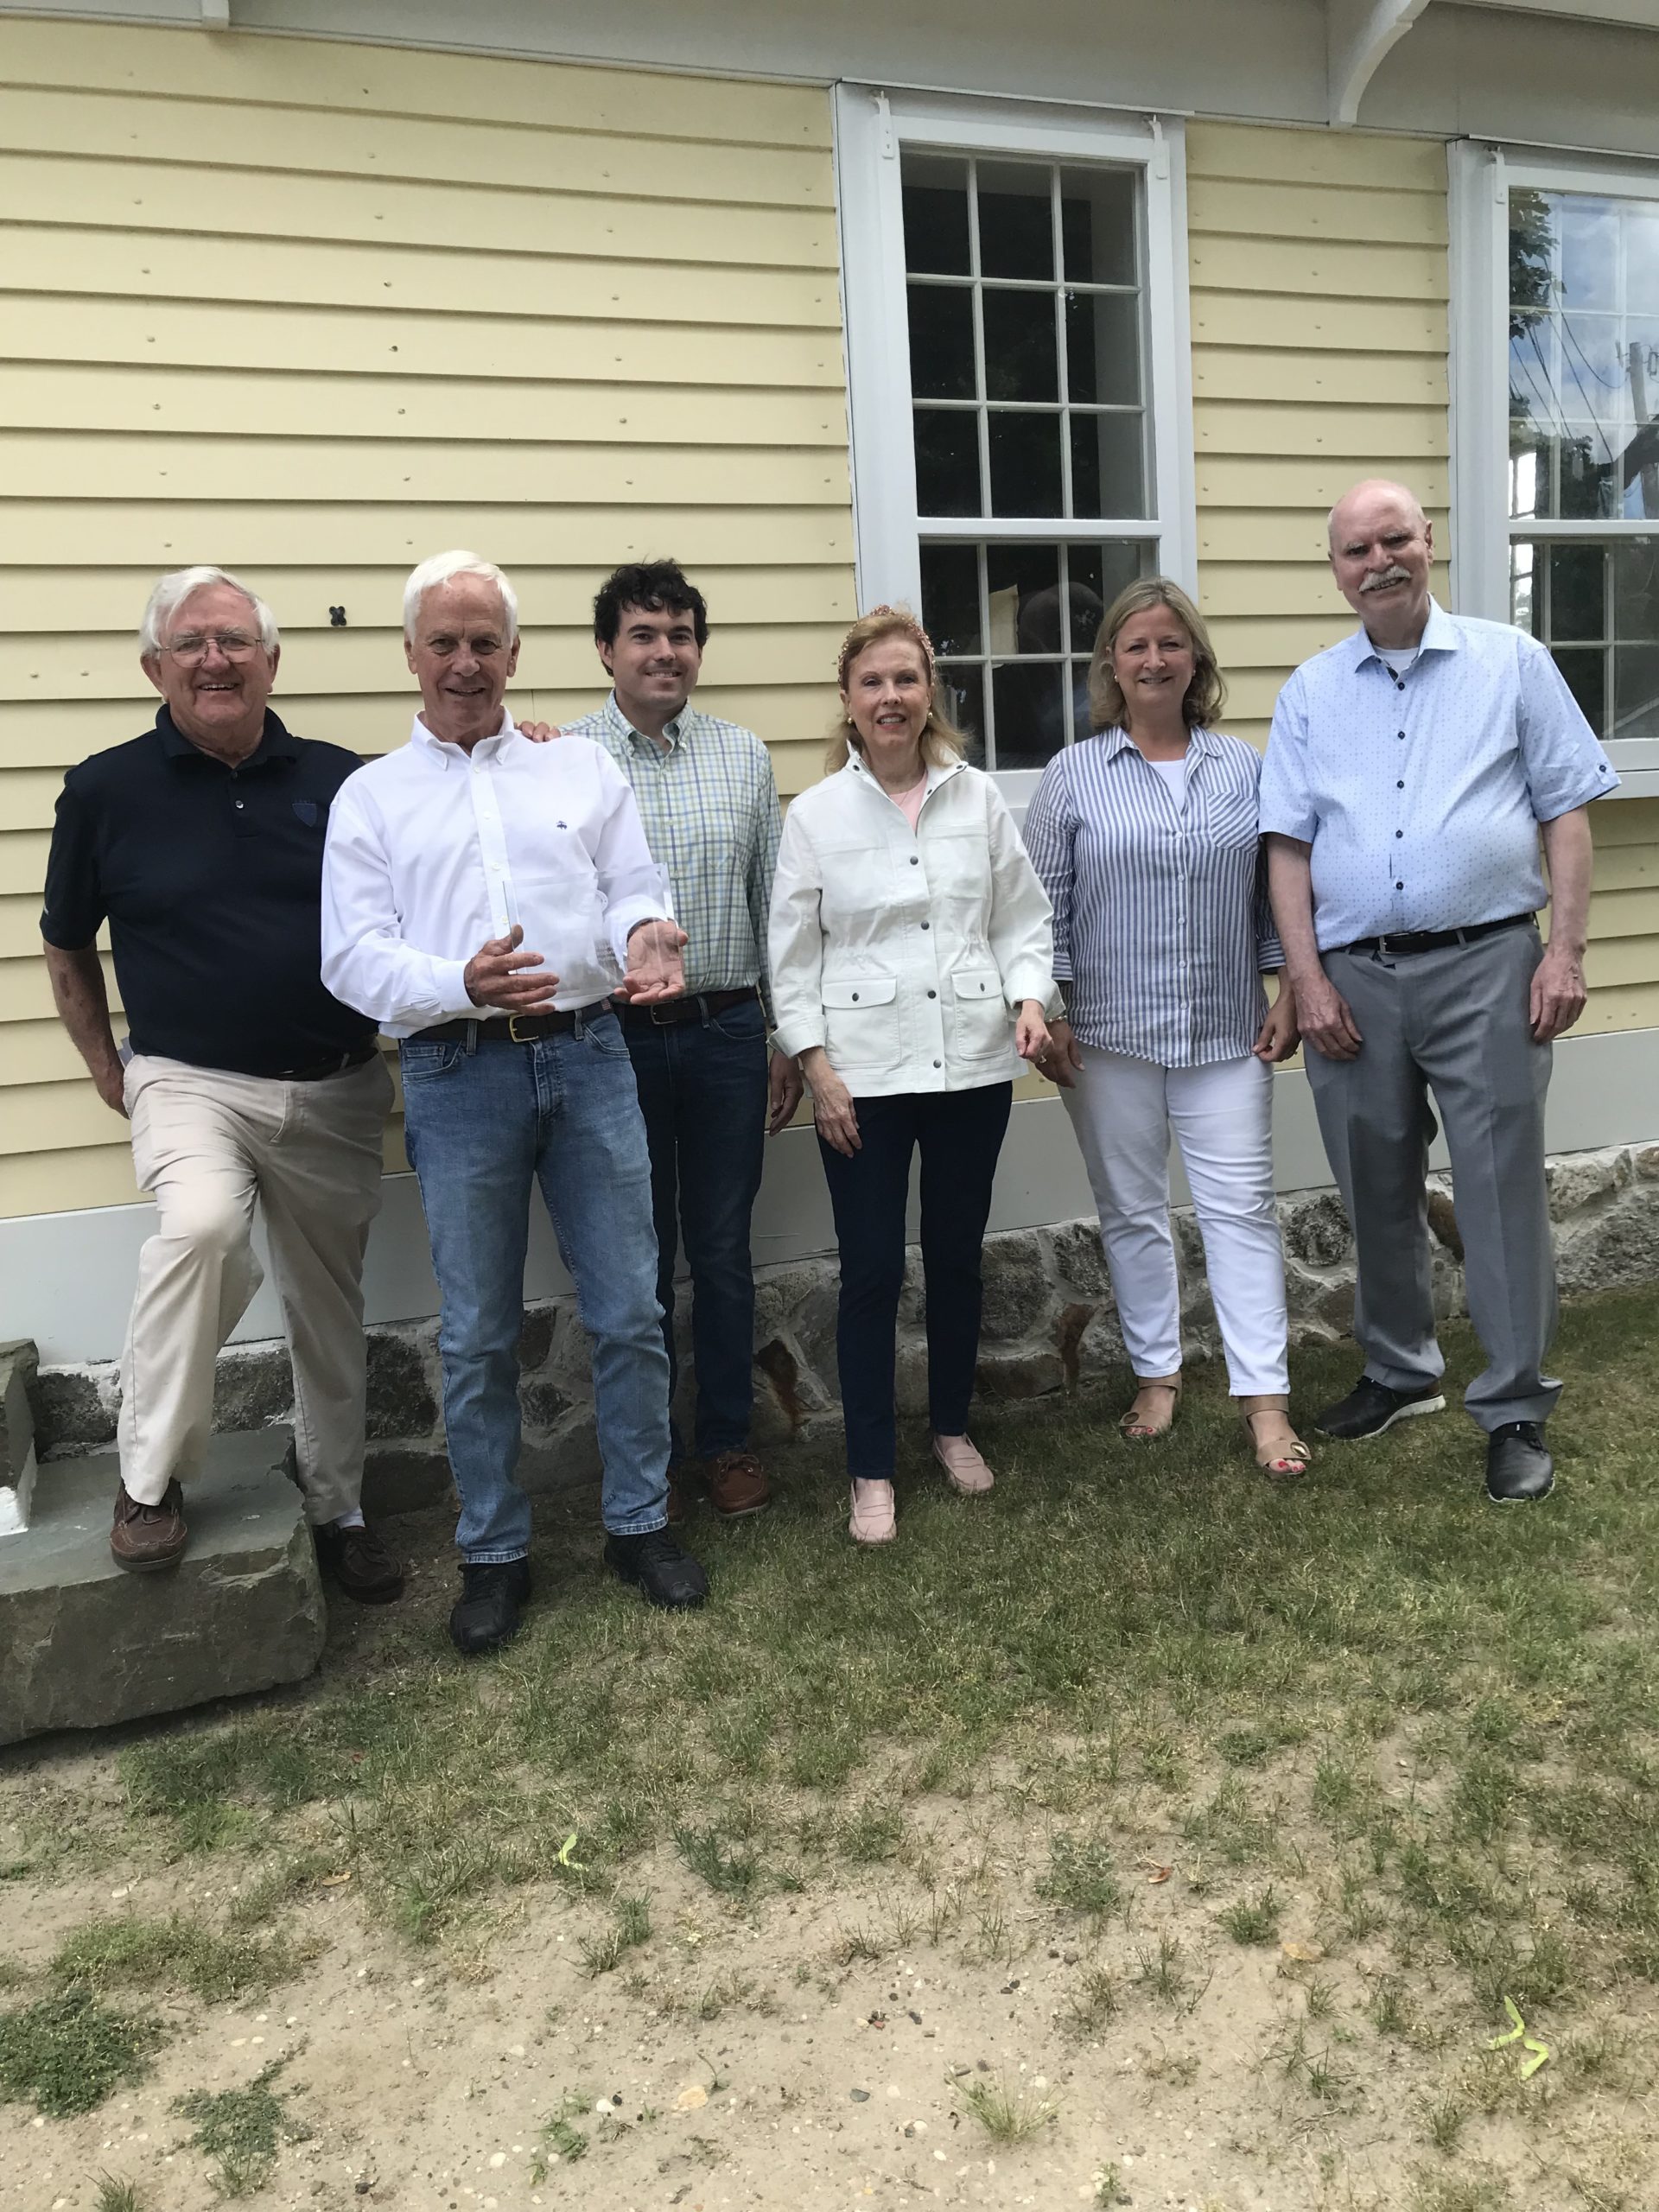 Robert Murray, Larry Jones, Evan Robinson, Maureen Jones, Westhampton Beach Mayor Maria Z. Moore, and Bo Bishop at a ceremony honoring Mr. Jones, a Westhampton Beach resident, for his historic preservation work. The award was given by the Westhampton Beach Historical Society.